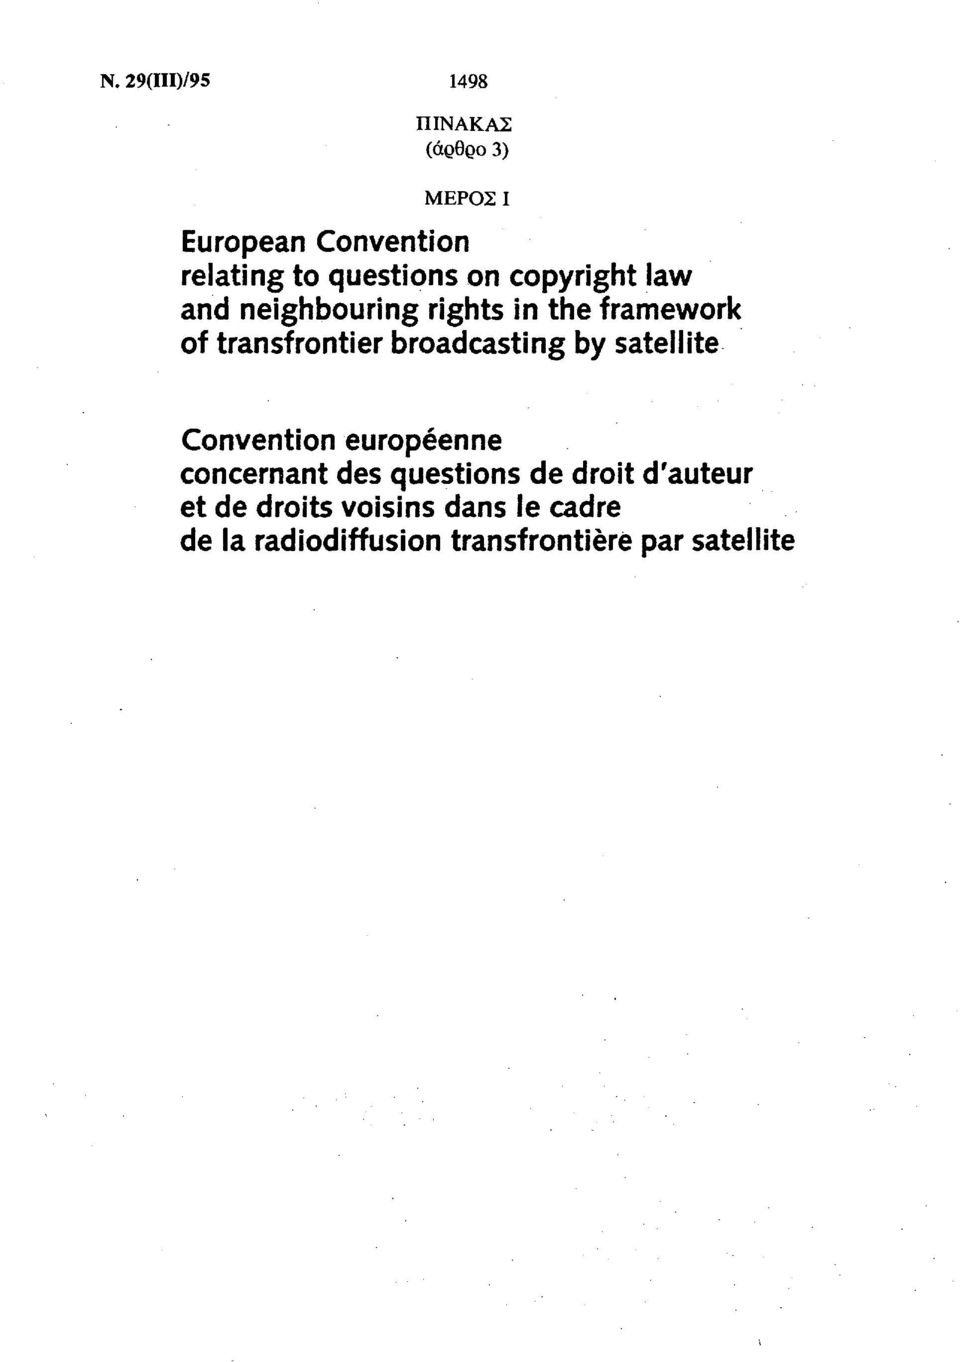 transfrontier broadcasting by satellite Convention europeenne concernant des